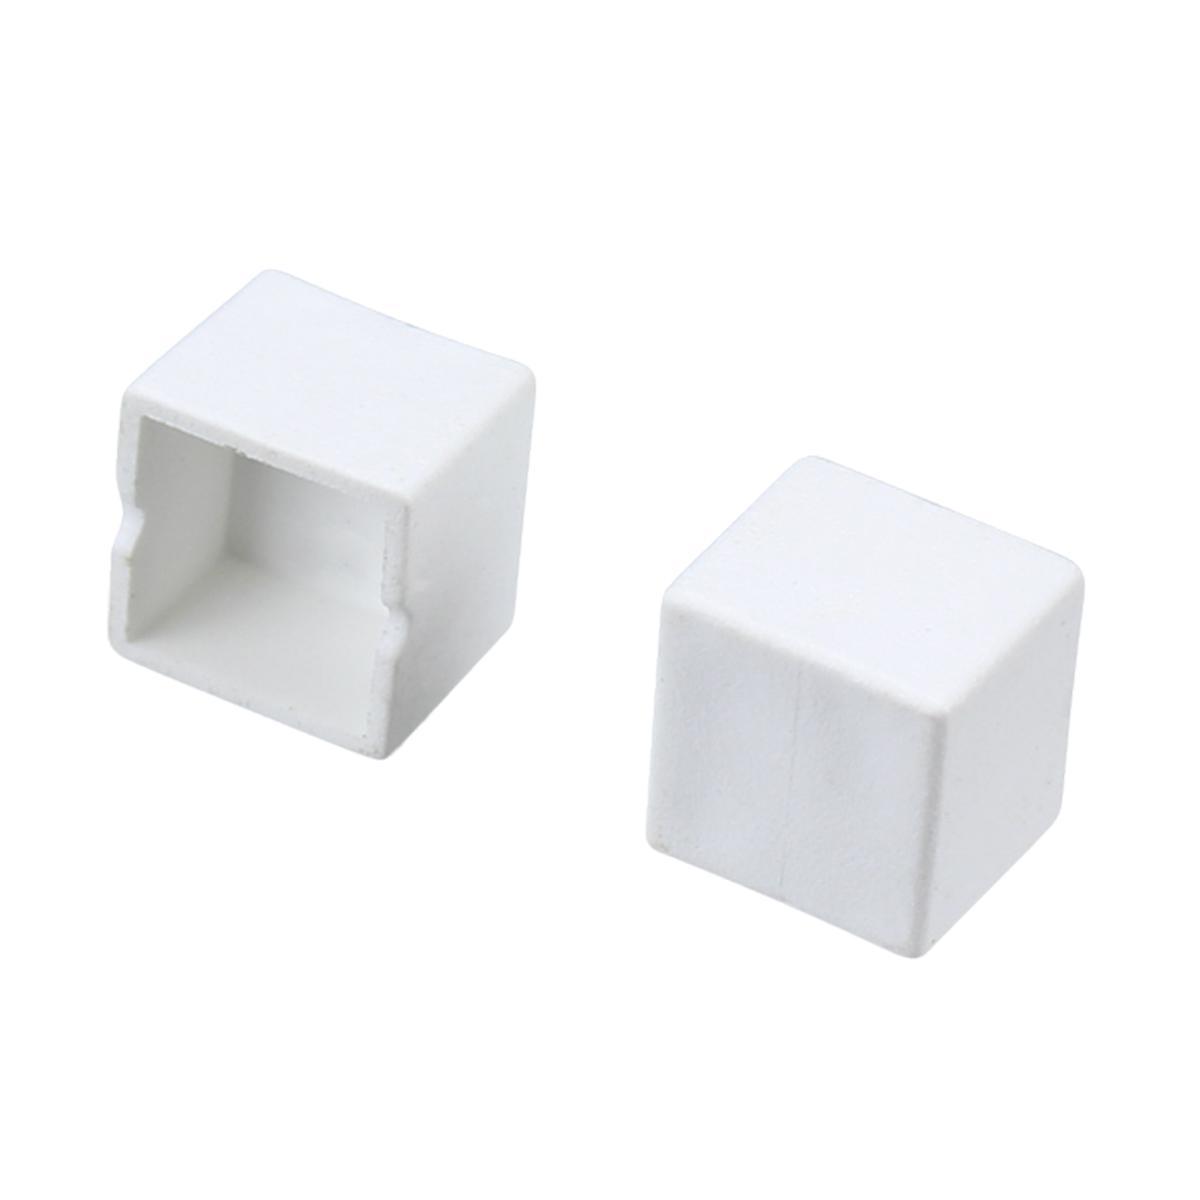 Microlux End Caps, Pack of 10 - Bees Lighting